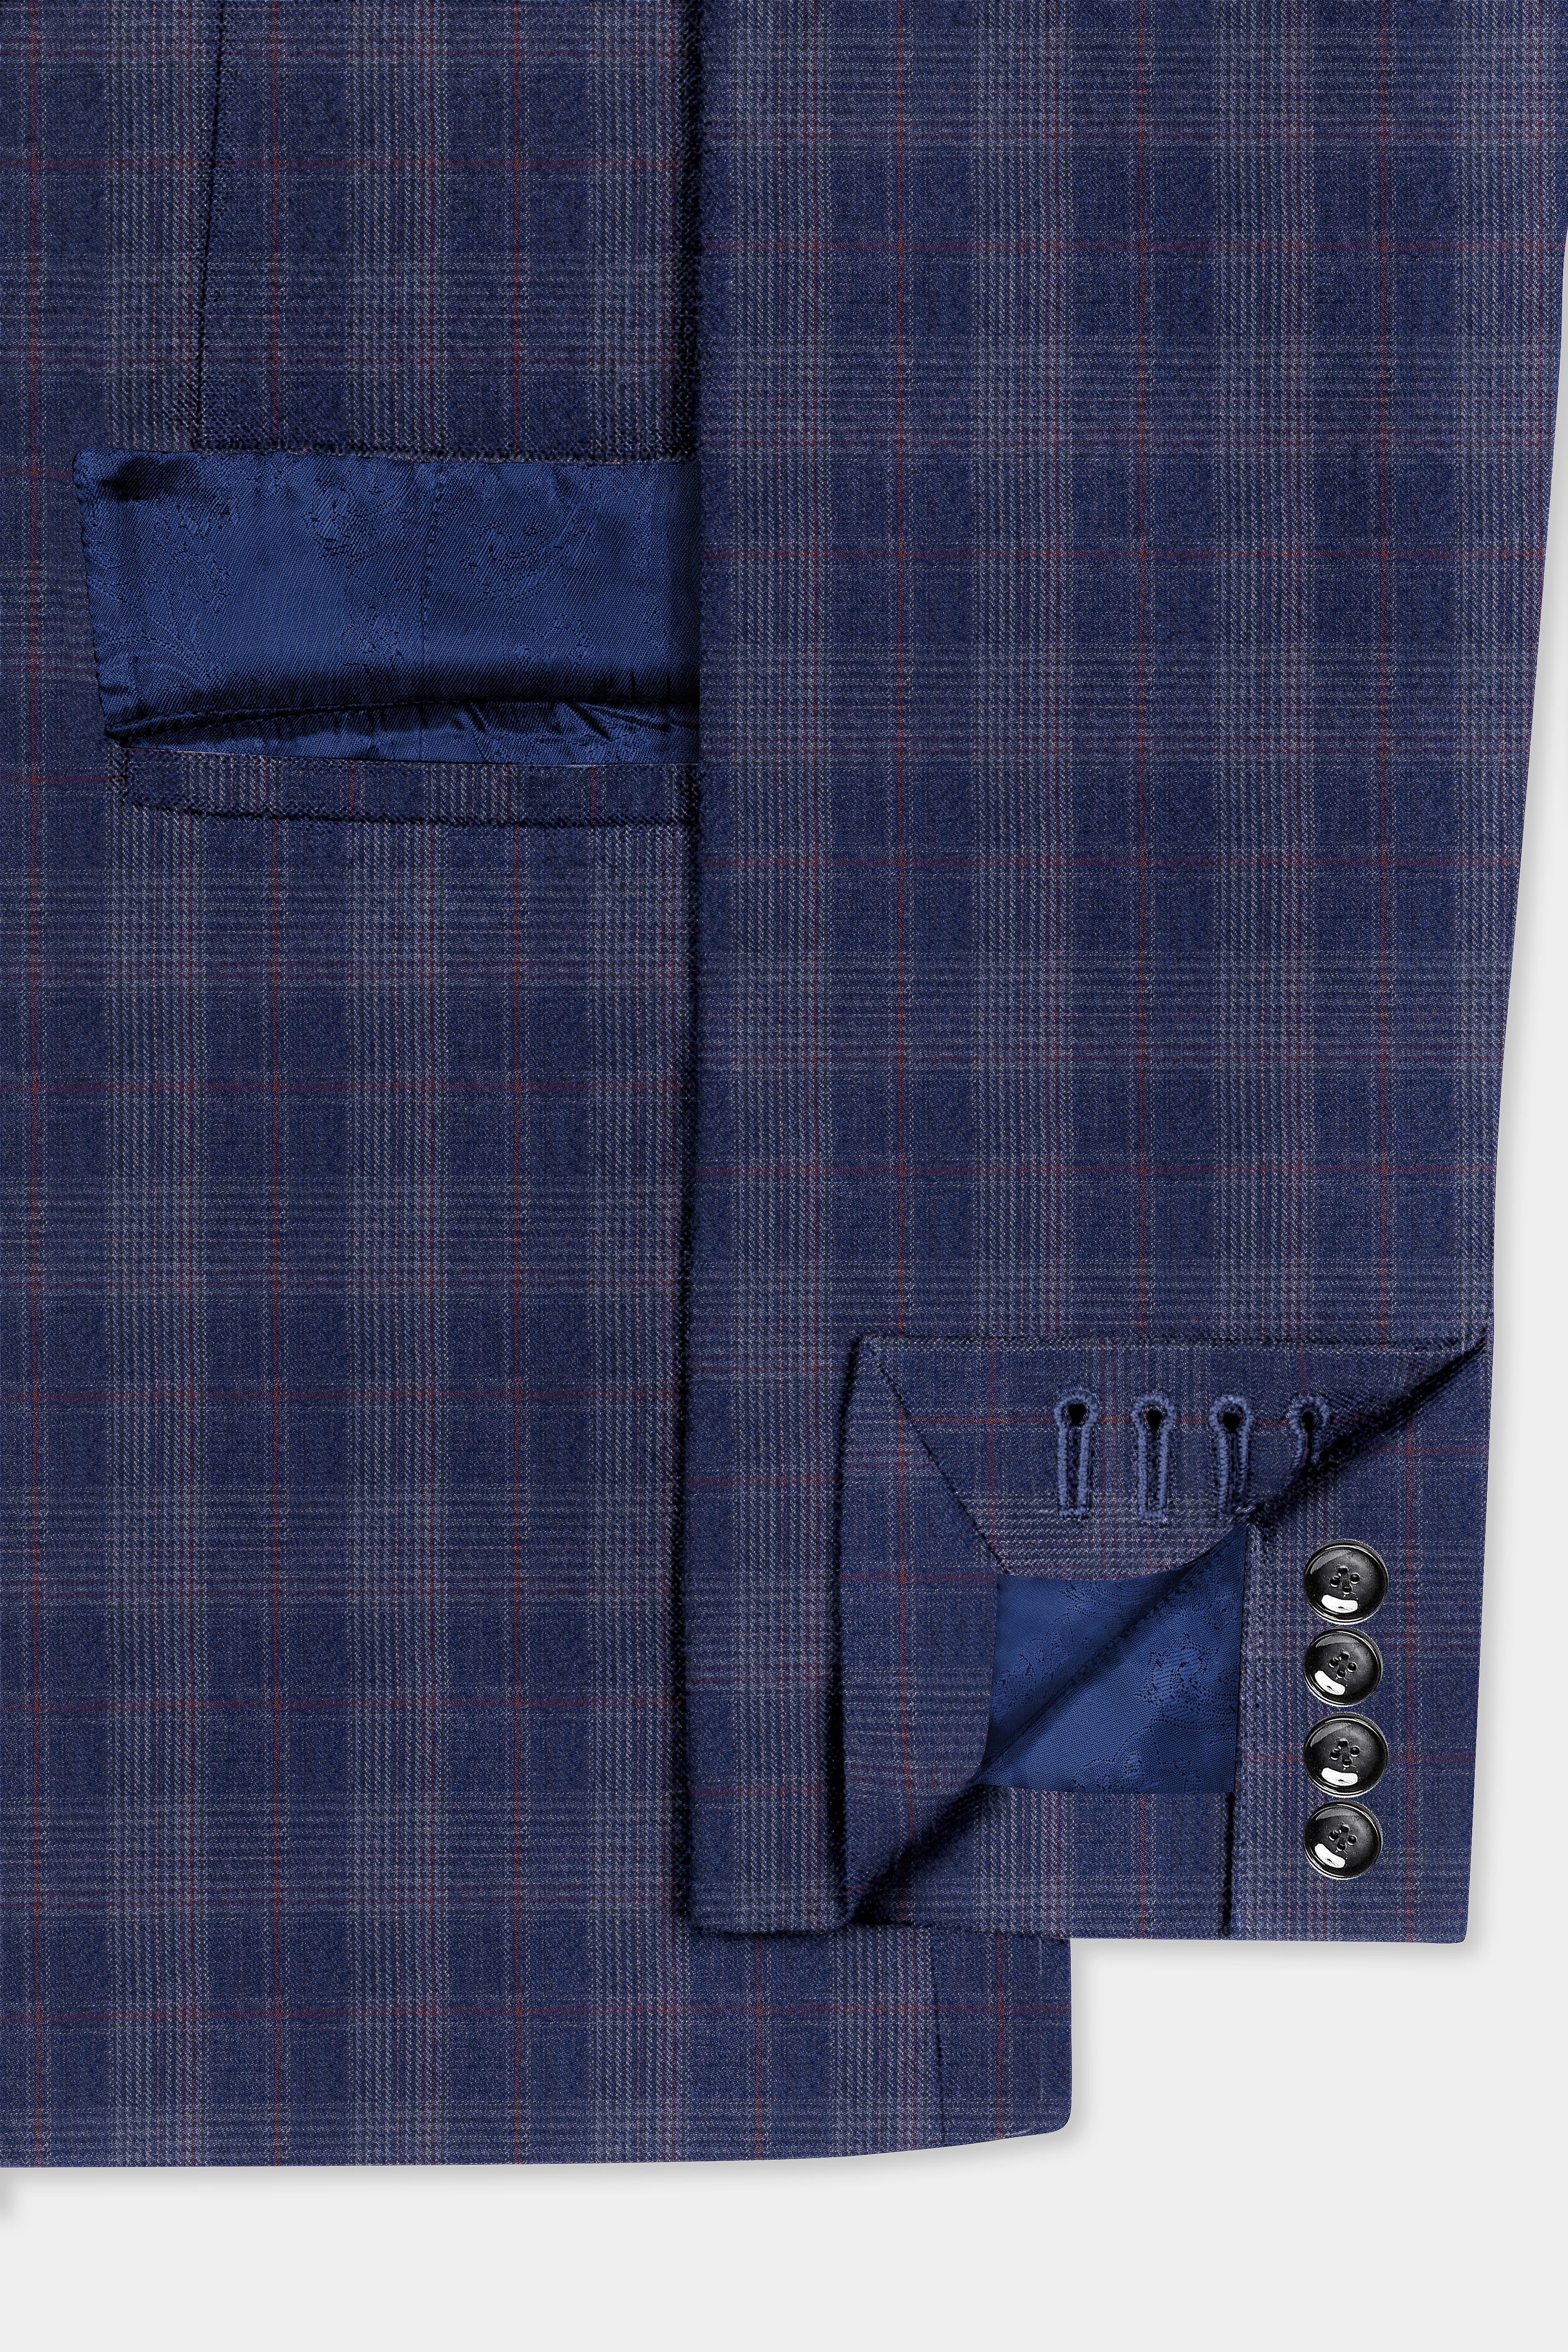 Tuna Blue Checkered Wool Blend Double Breasted Suit